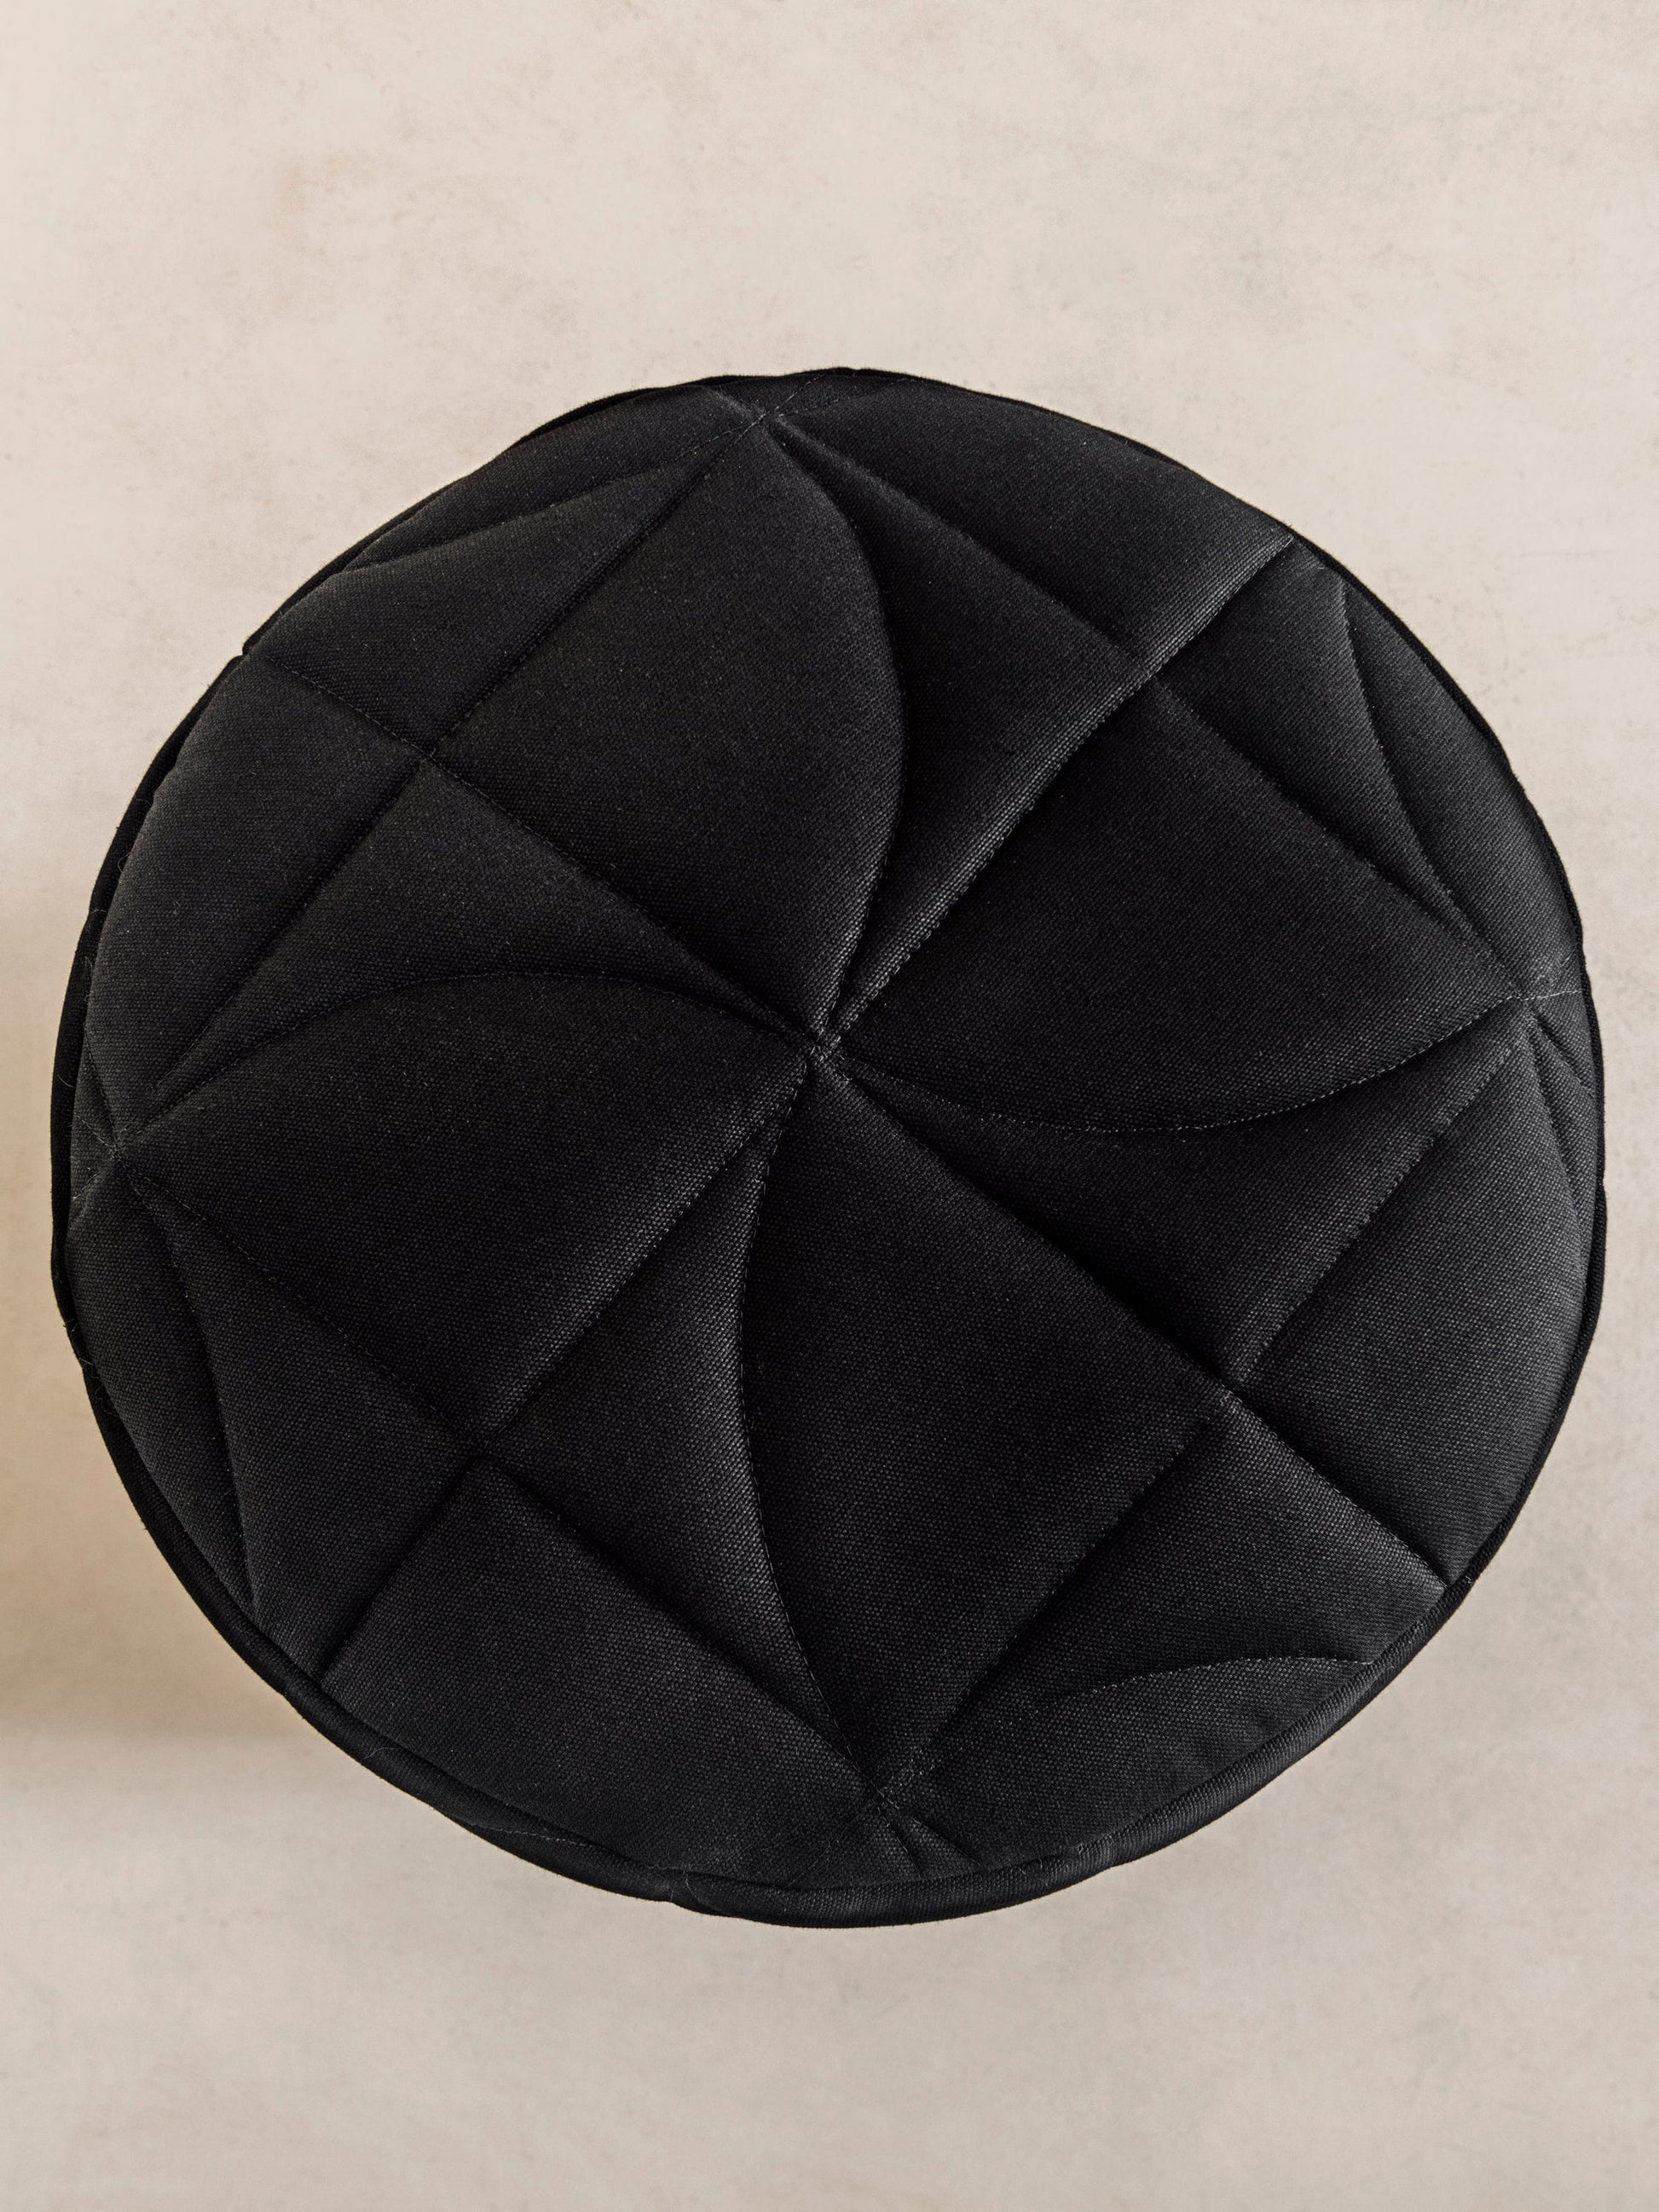 Contemporary Black Quilted Stool by Studio Sam Klemick Stools